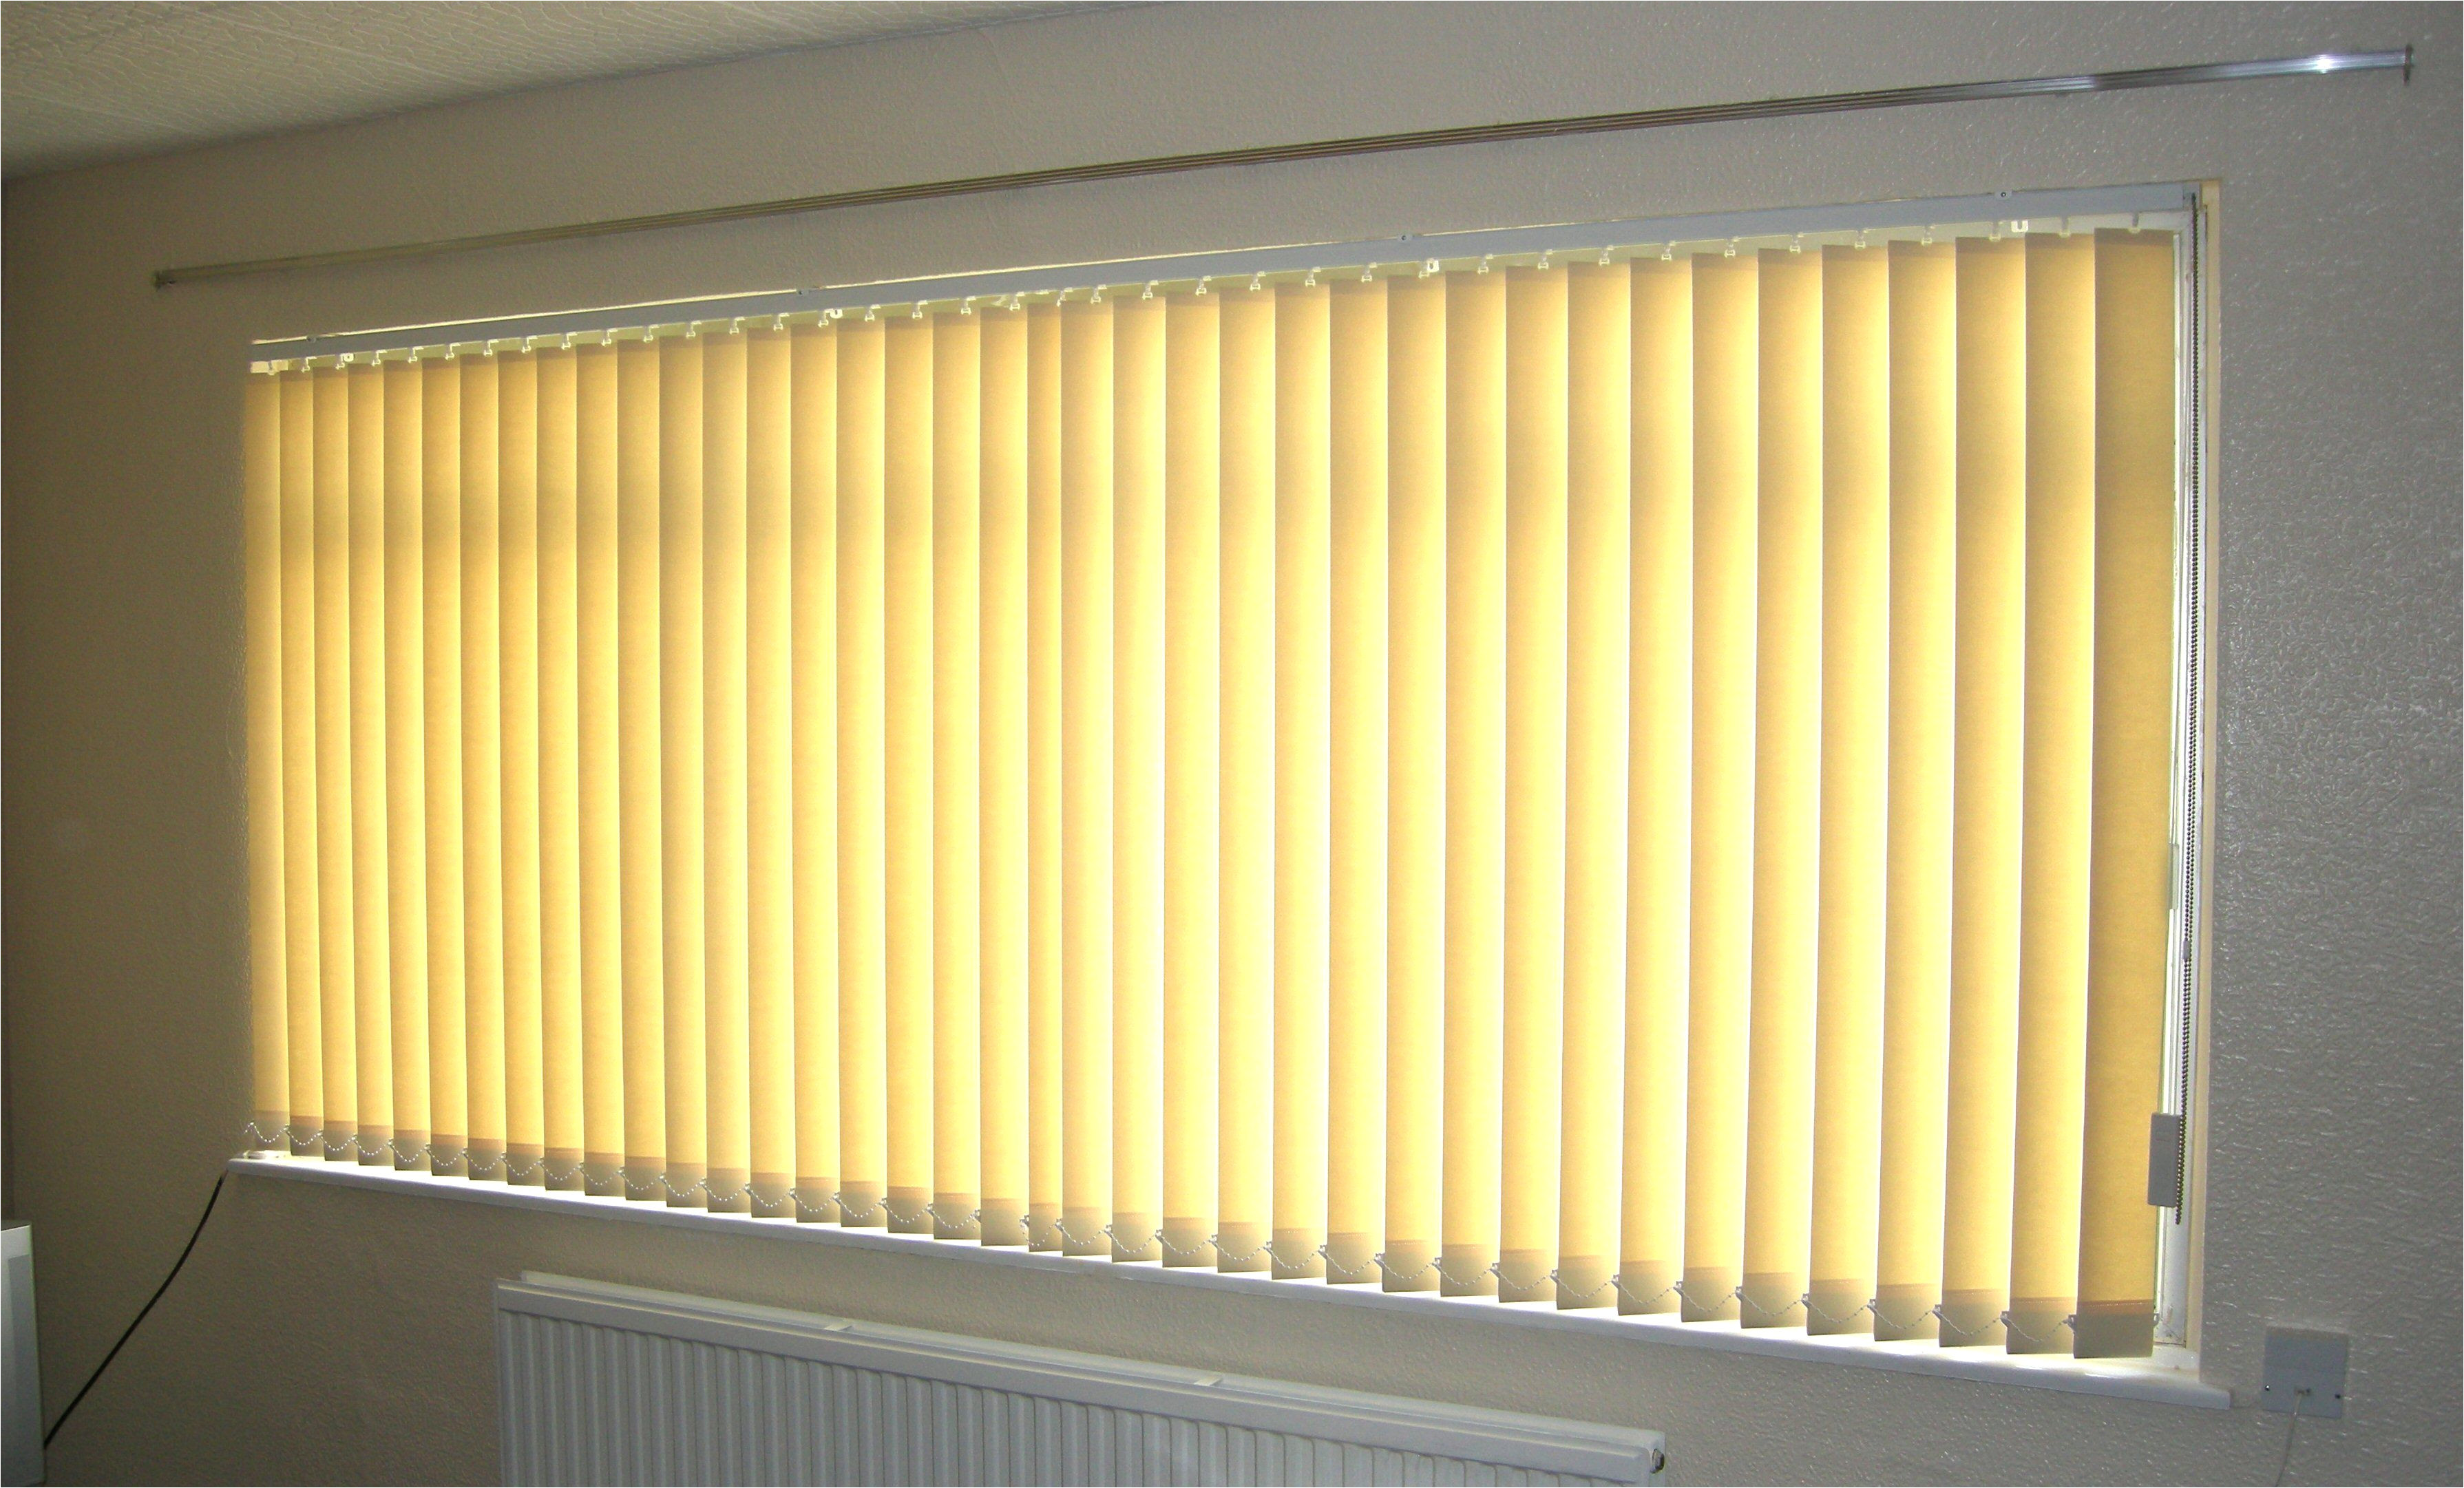 mural of most common types of window blinds